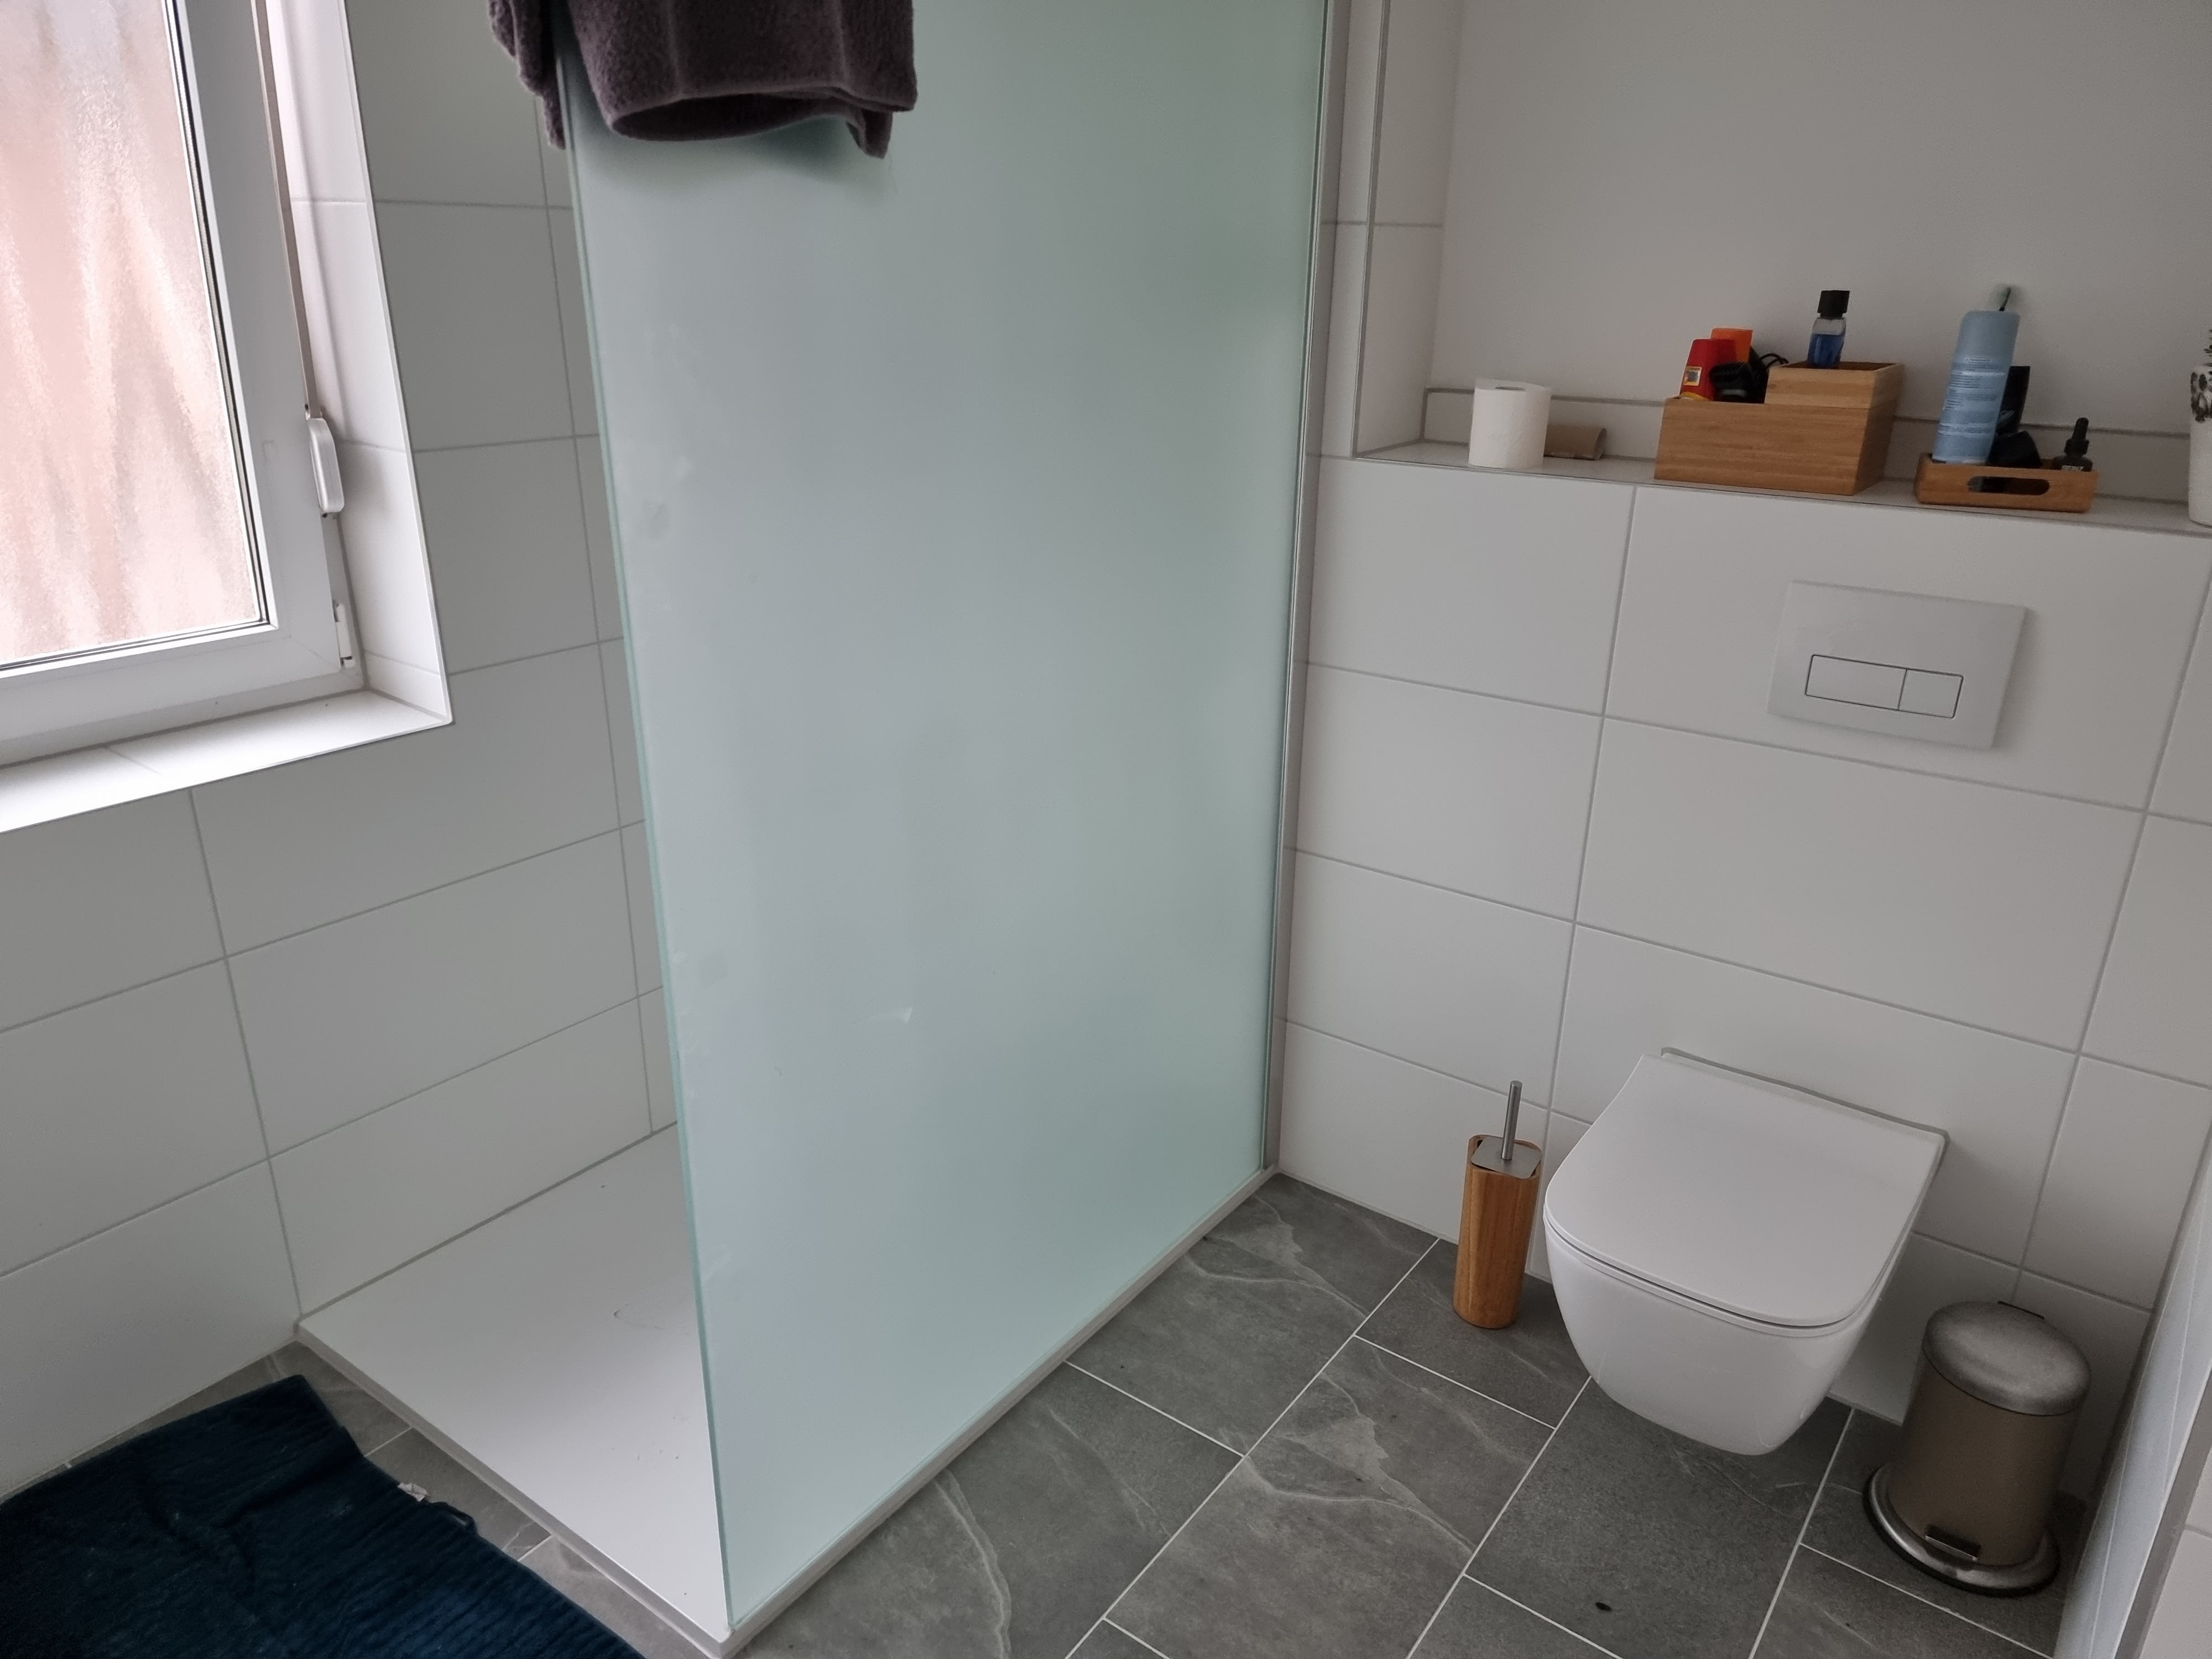 The bathroom was completely renovated by Guido Breitbach. The picture shows a bathroom with a toilet gray floor tiles and white rectangular large tiles on the wall. You can also see the shower